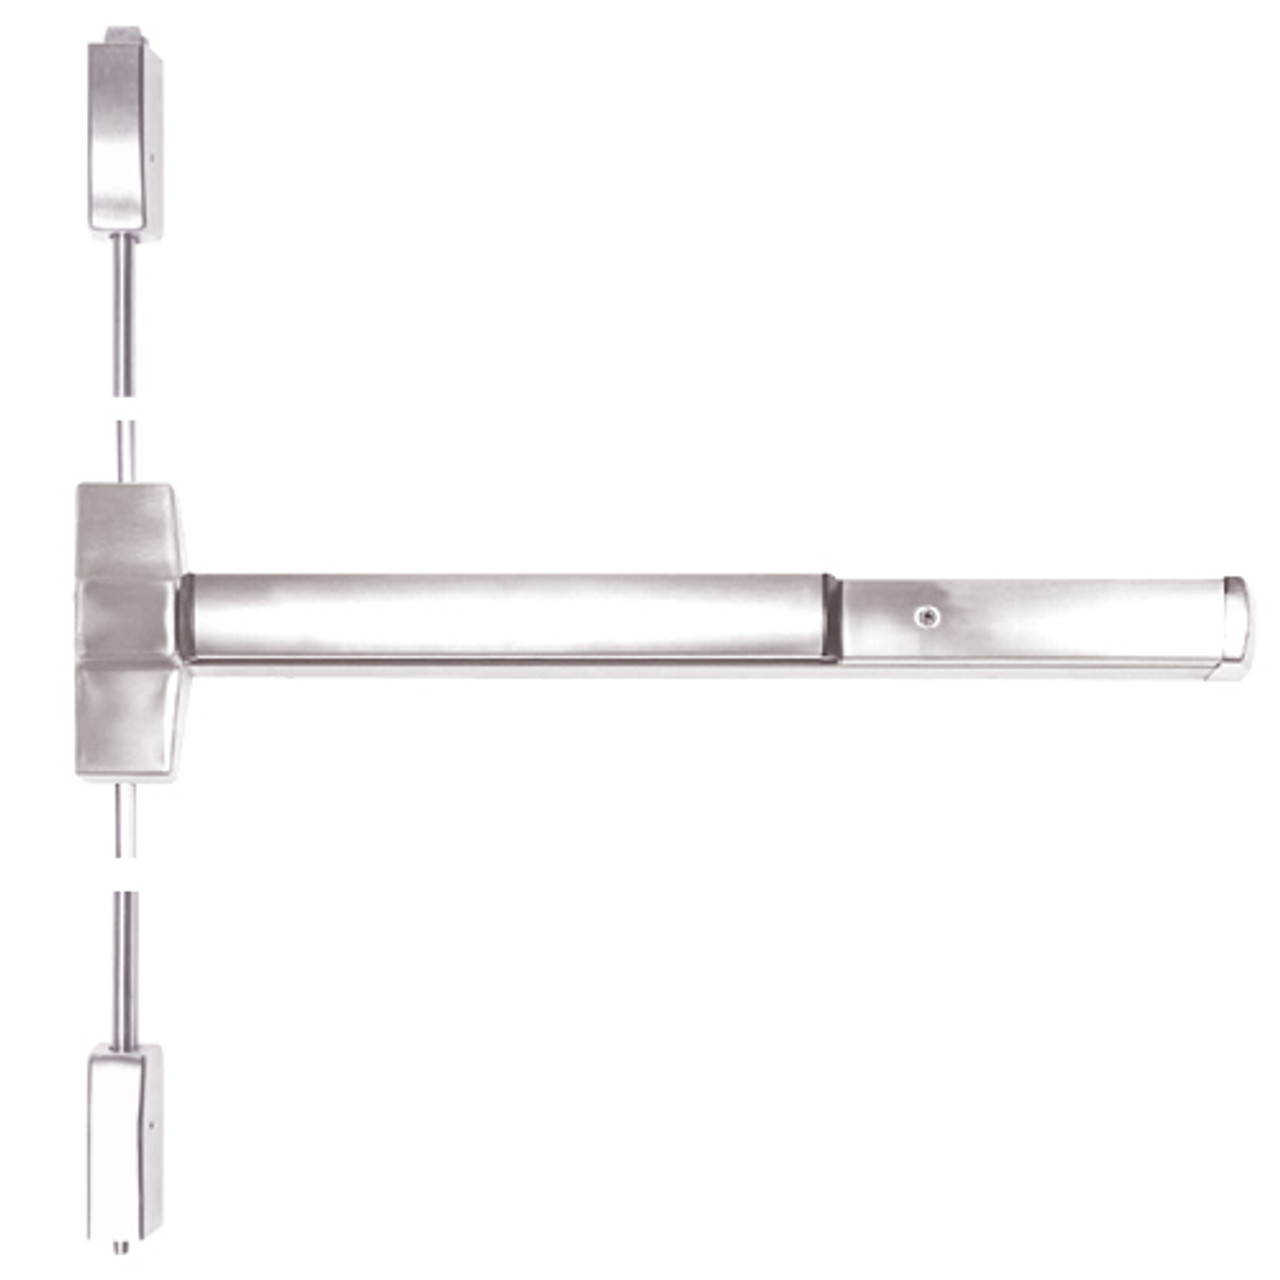 ED5470-629-MELR Corbin ED5400 Series Non Fire Rated Vertical Rod Exit Device with Motor Latch Retraction in Bright Stainless Steel Finish